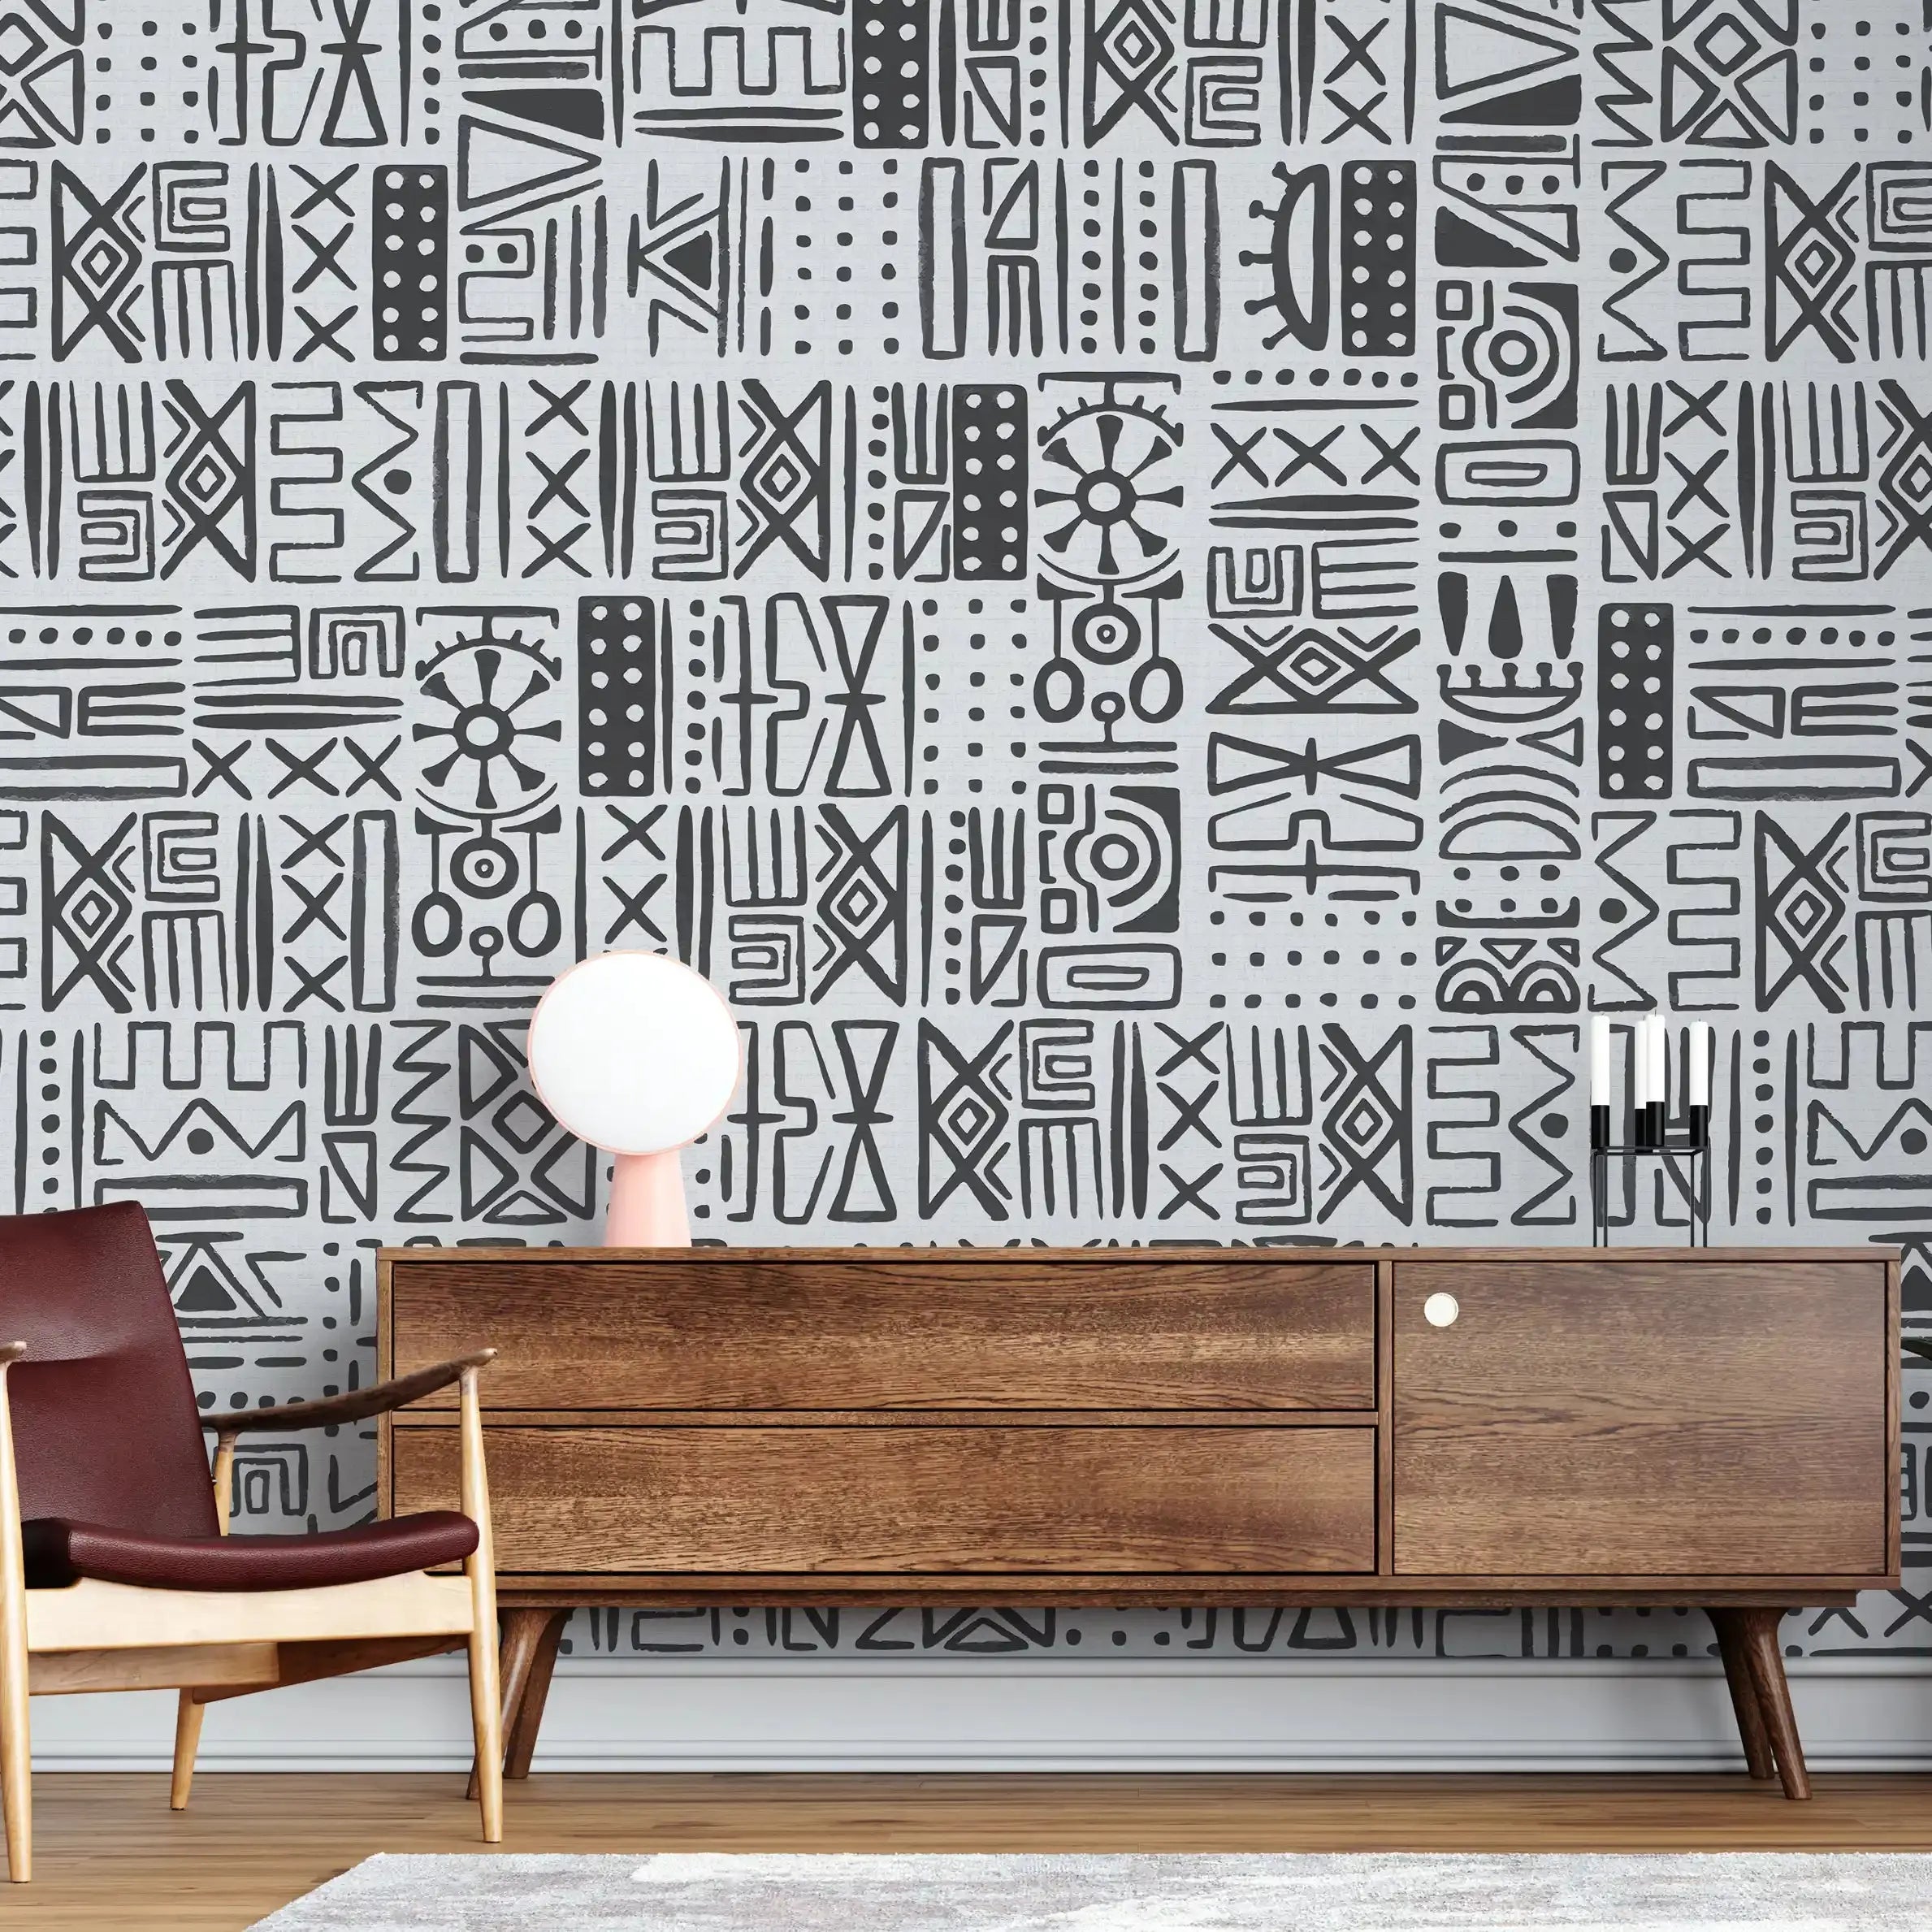 3030-E / African Inspired Peel and Stick Wallpaper, Geometric Black and Beige Patterns Wall Mural - Artevella